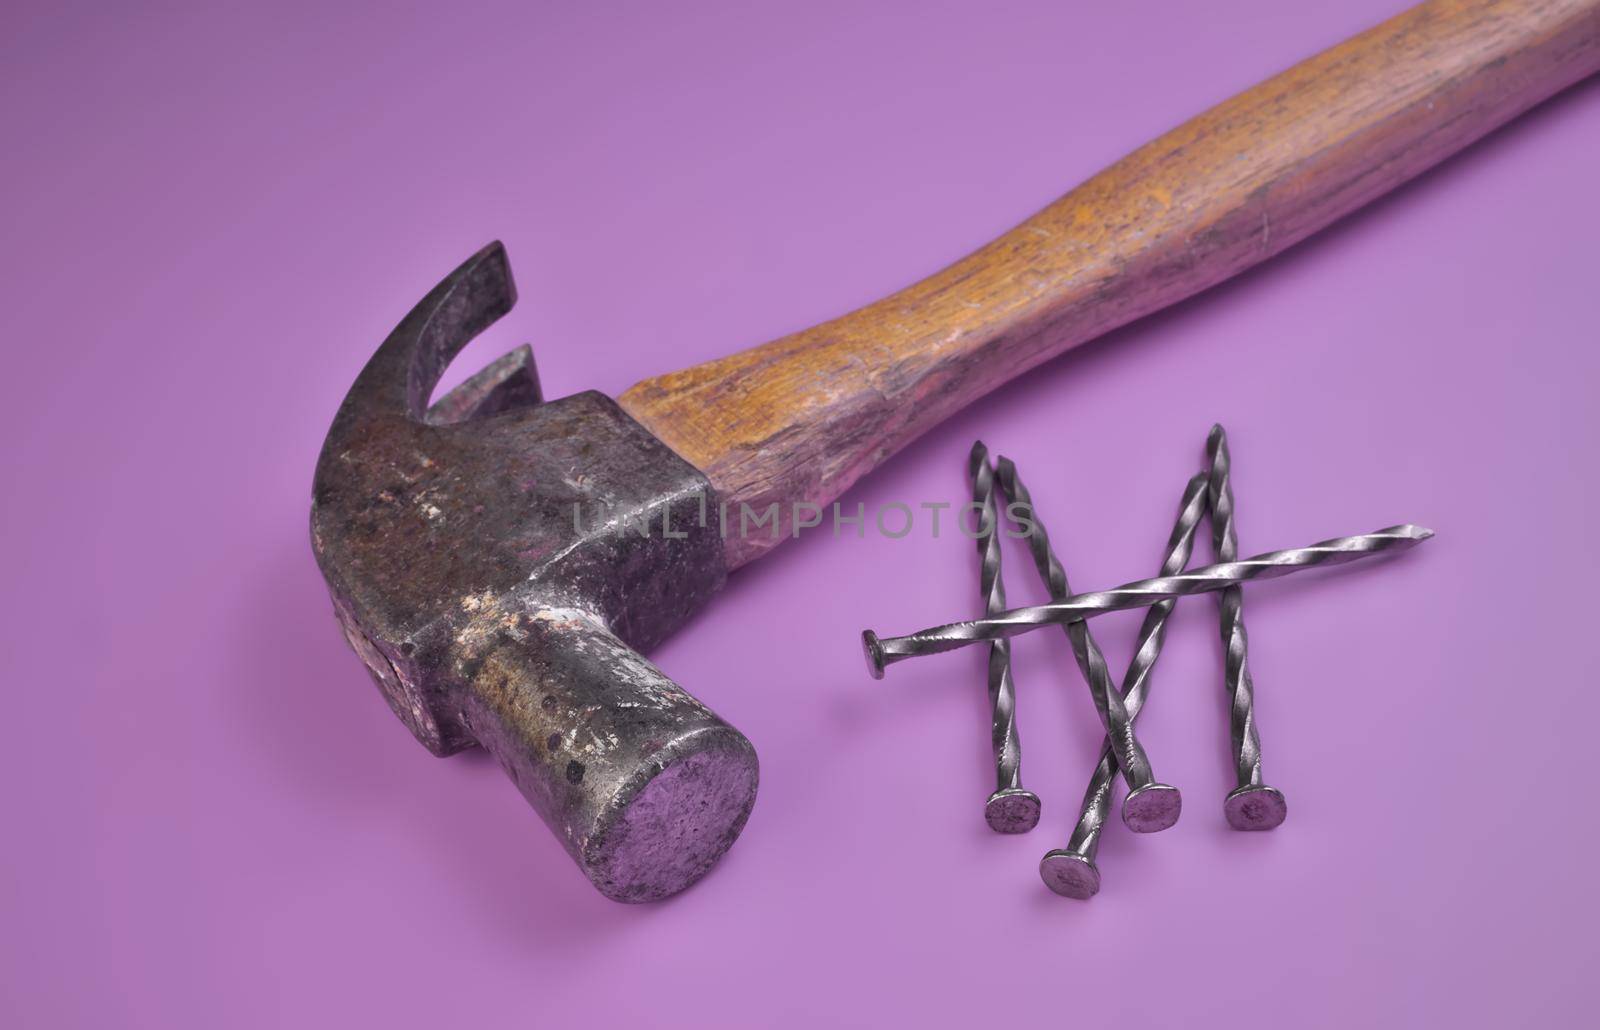 High Angle View of Hammer and Nails Isolated on a Lavender Purple Background by markvandam